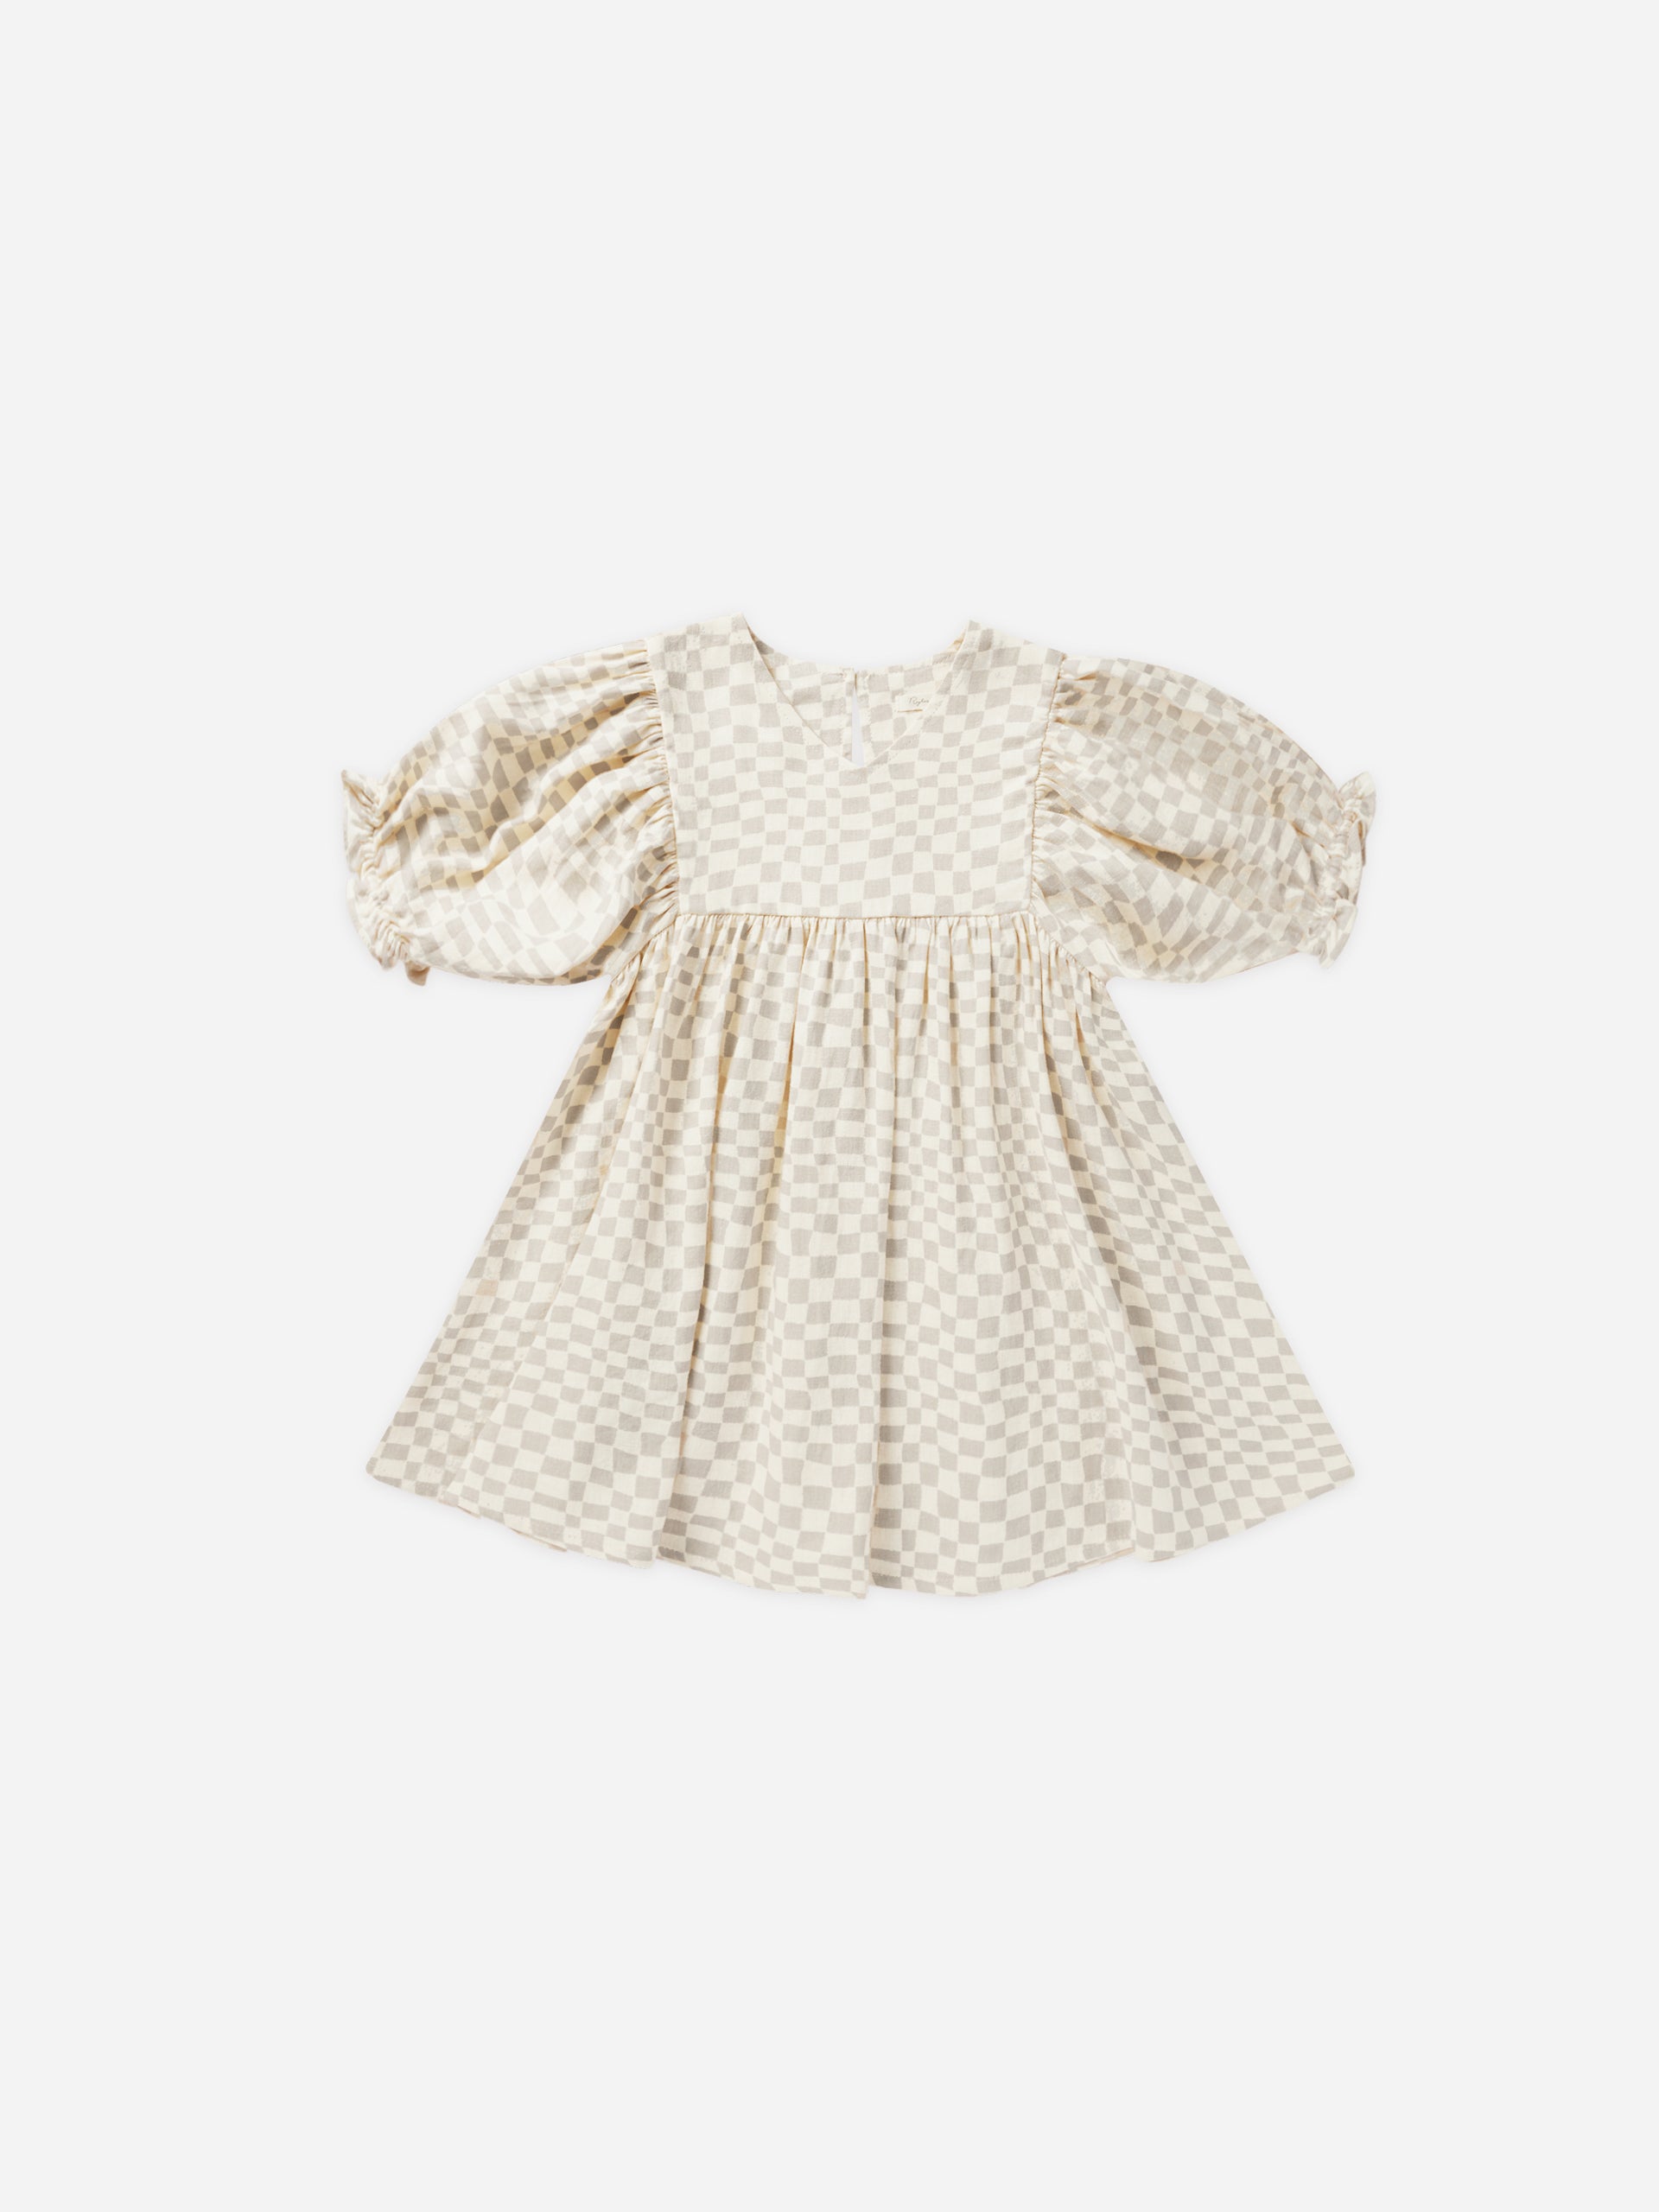 Jolene Dress || Dove Check - Rylee + Cru | Kids Clothes | Trendy Baby Clothes | Modern Infant Outfits |